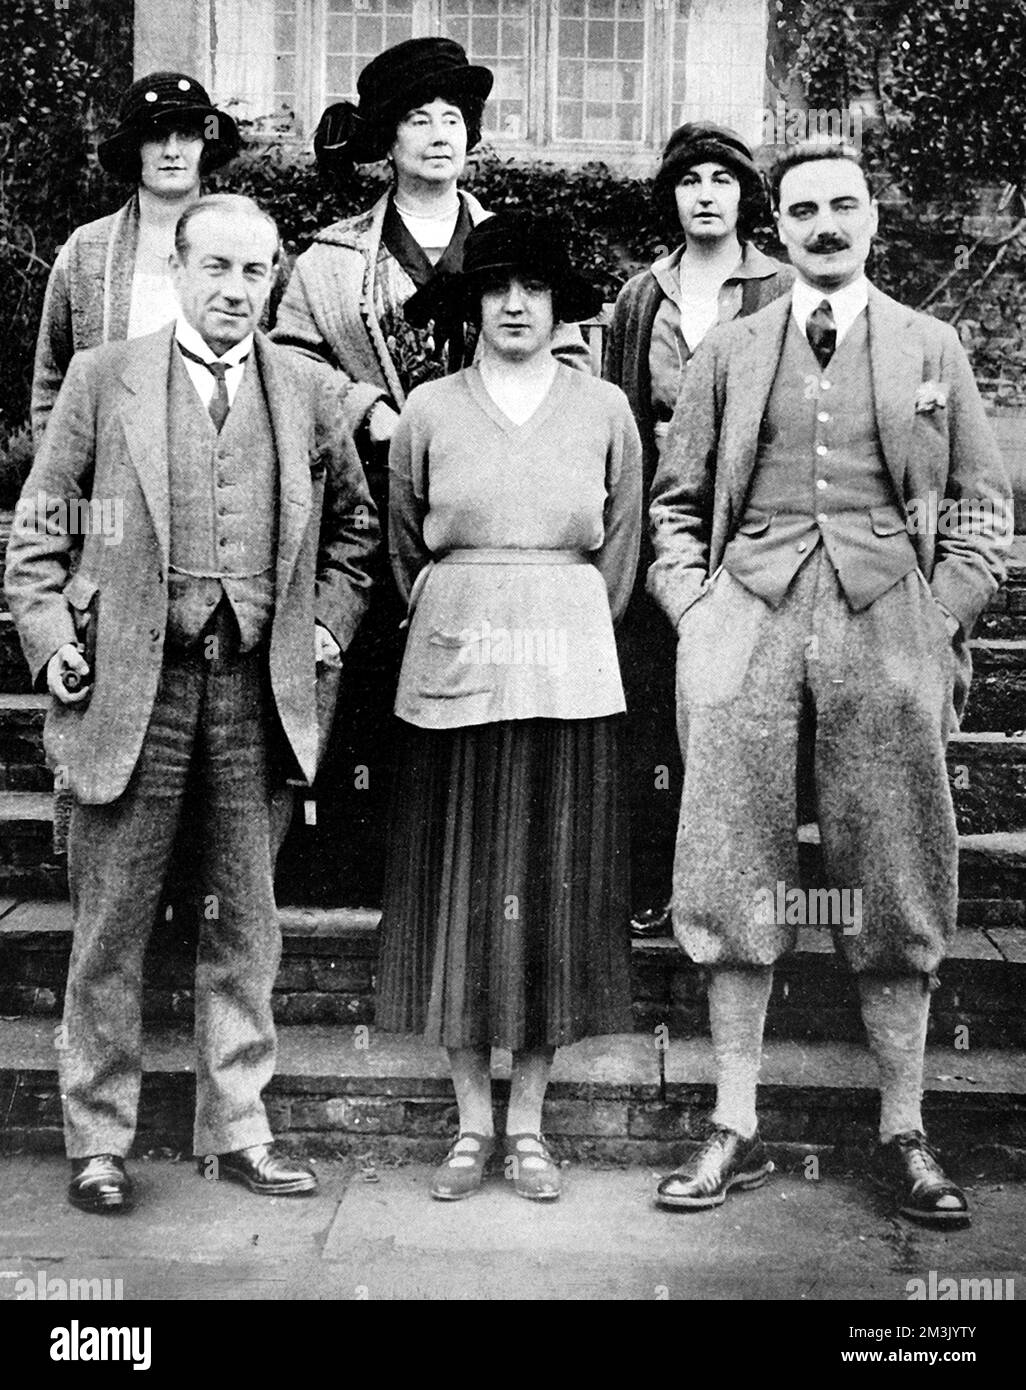 https://c8.alamy.com/comp/2M3JYTY/photograph-of-stanley-baldwin-1867-1947-conservative-politician-and-prime-minister-bottom-left-and-his-family-clockwise-from-top-left-hon-mrs-howard-mrs-stanley-baldwin-mrs-bambridge-captain-gordon-munro-and-mrs-gordon-munro-date-1926-2M3JYTY.jpg